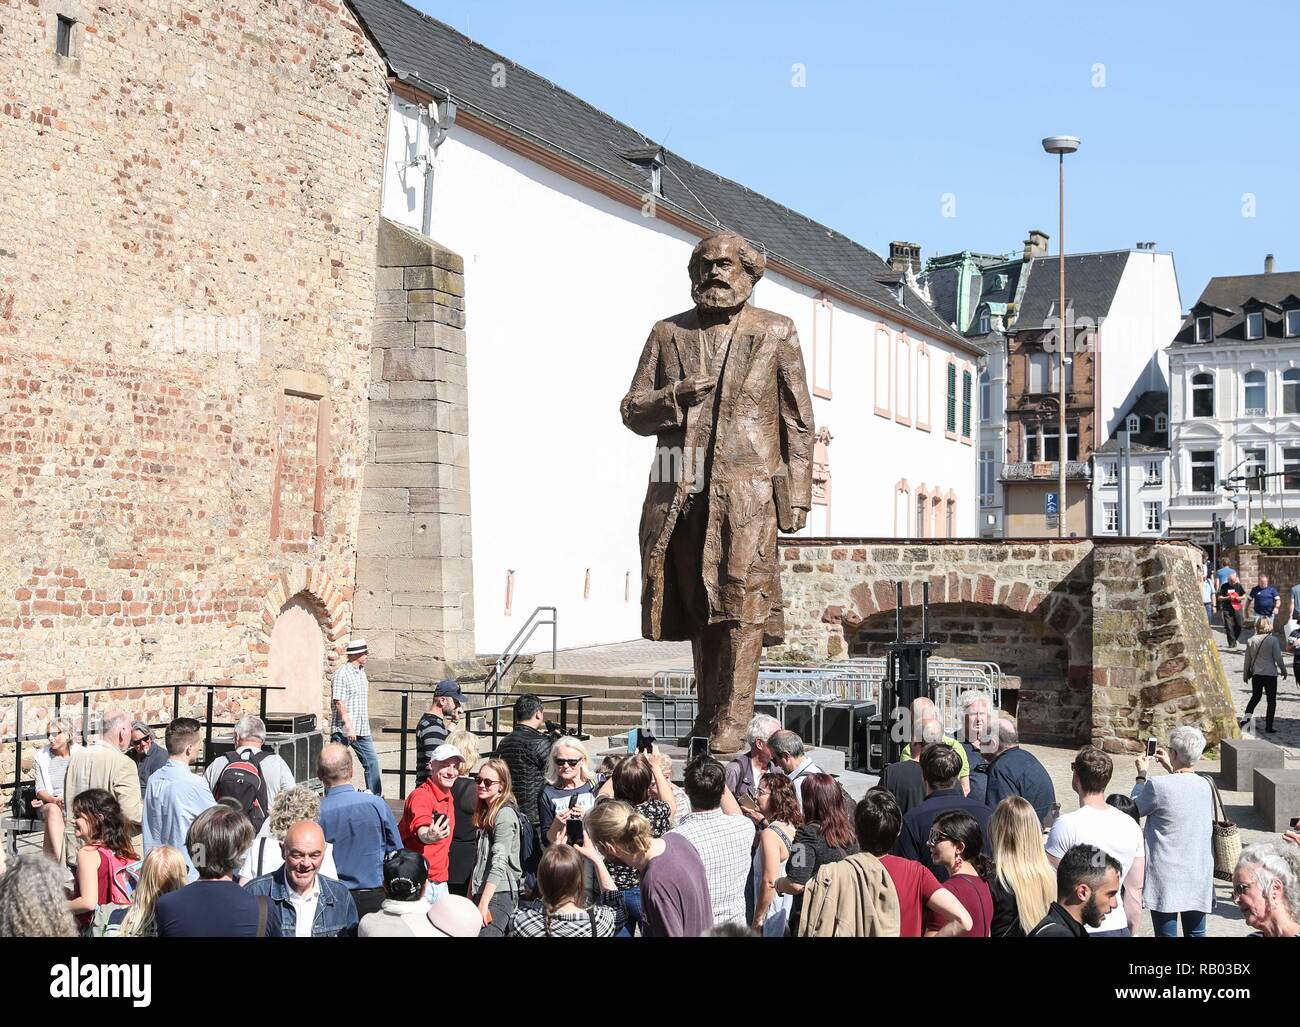 Beijing, Germany. 5th May, 2018. Visitors gather in front of the Karl Marx statue in Trier, Germany, on May 5, 2018. A China-donated statue of German philosopher Karl Marx was unveiled on May 5 in his birth town on the 200th anniversary of his birth. Credit: Shan Yuqi/Xinhua/Alamy Live News Stock Photo